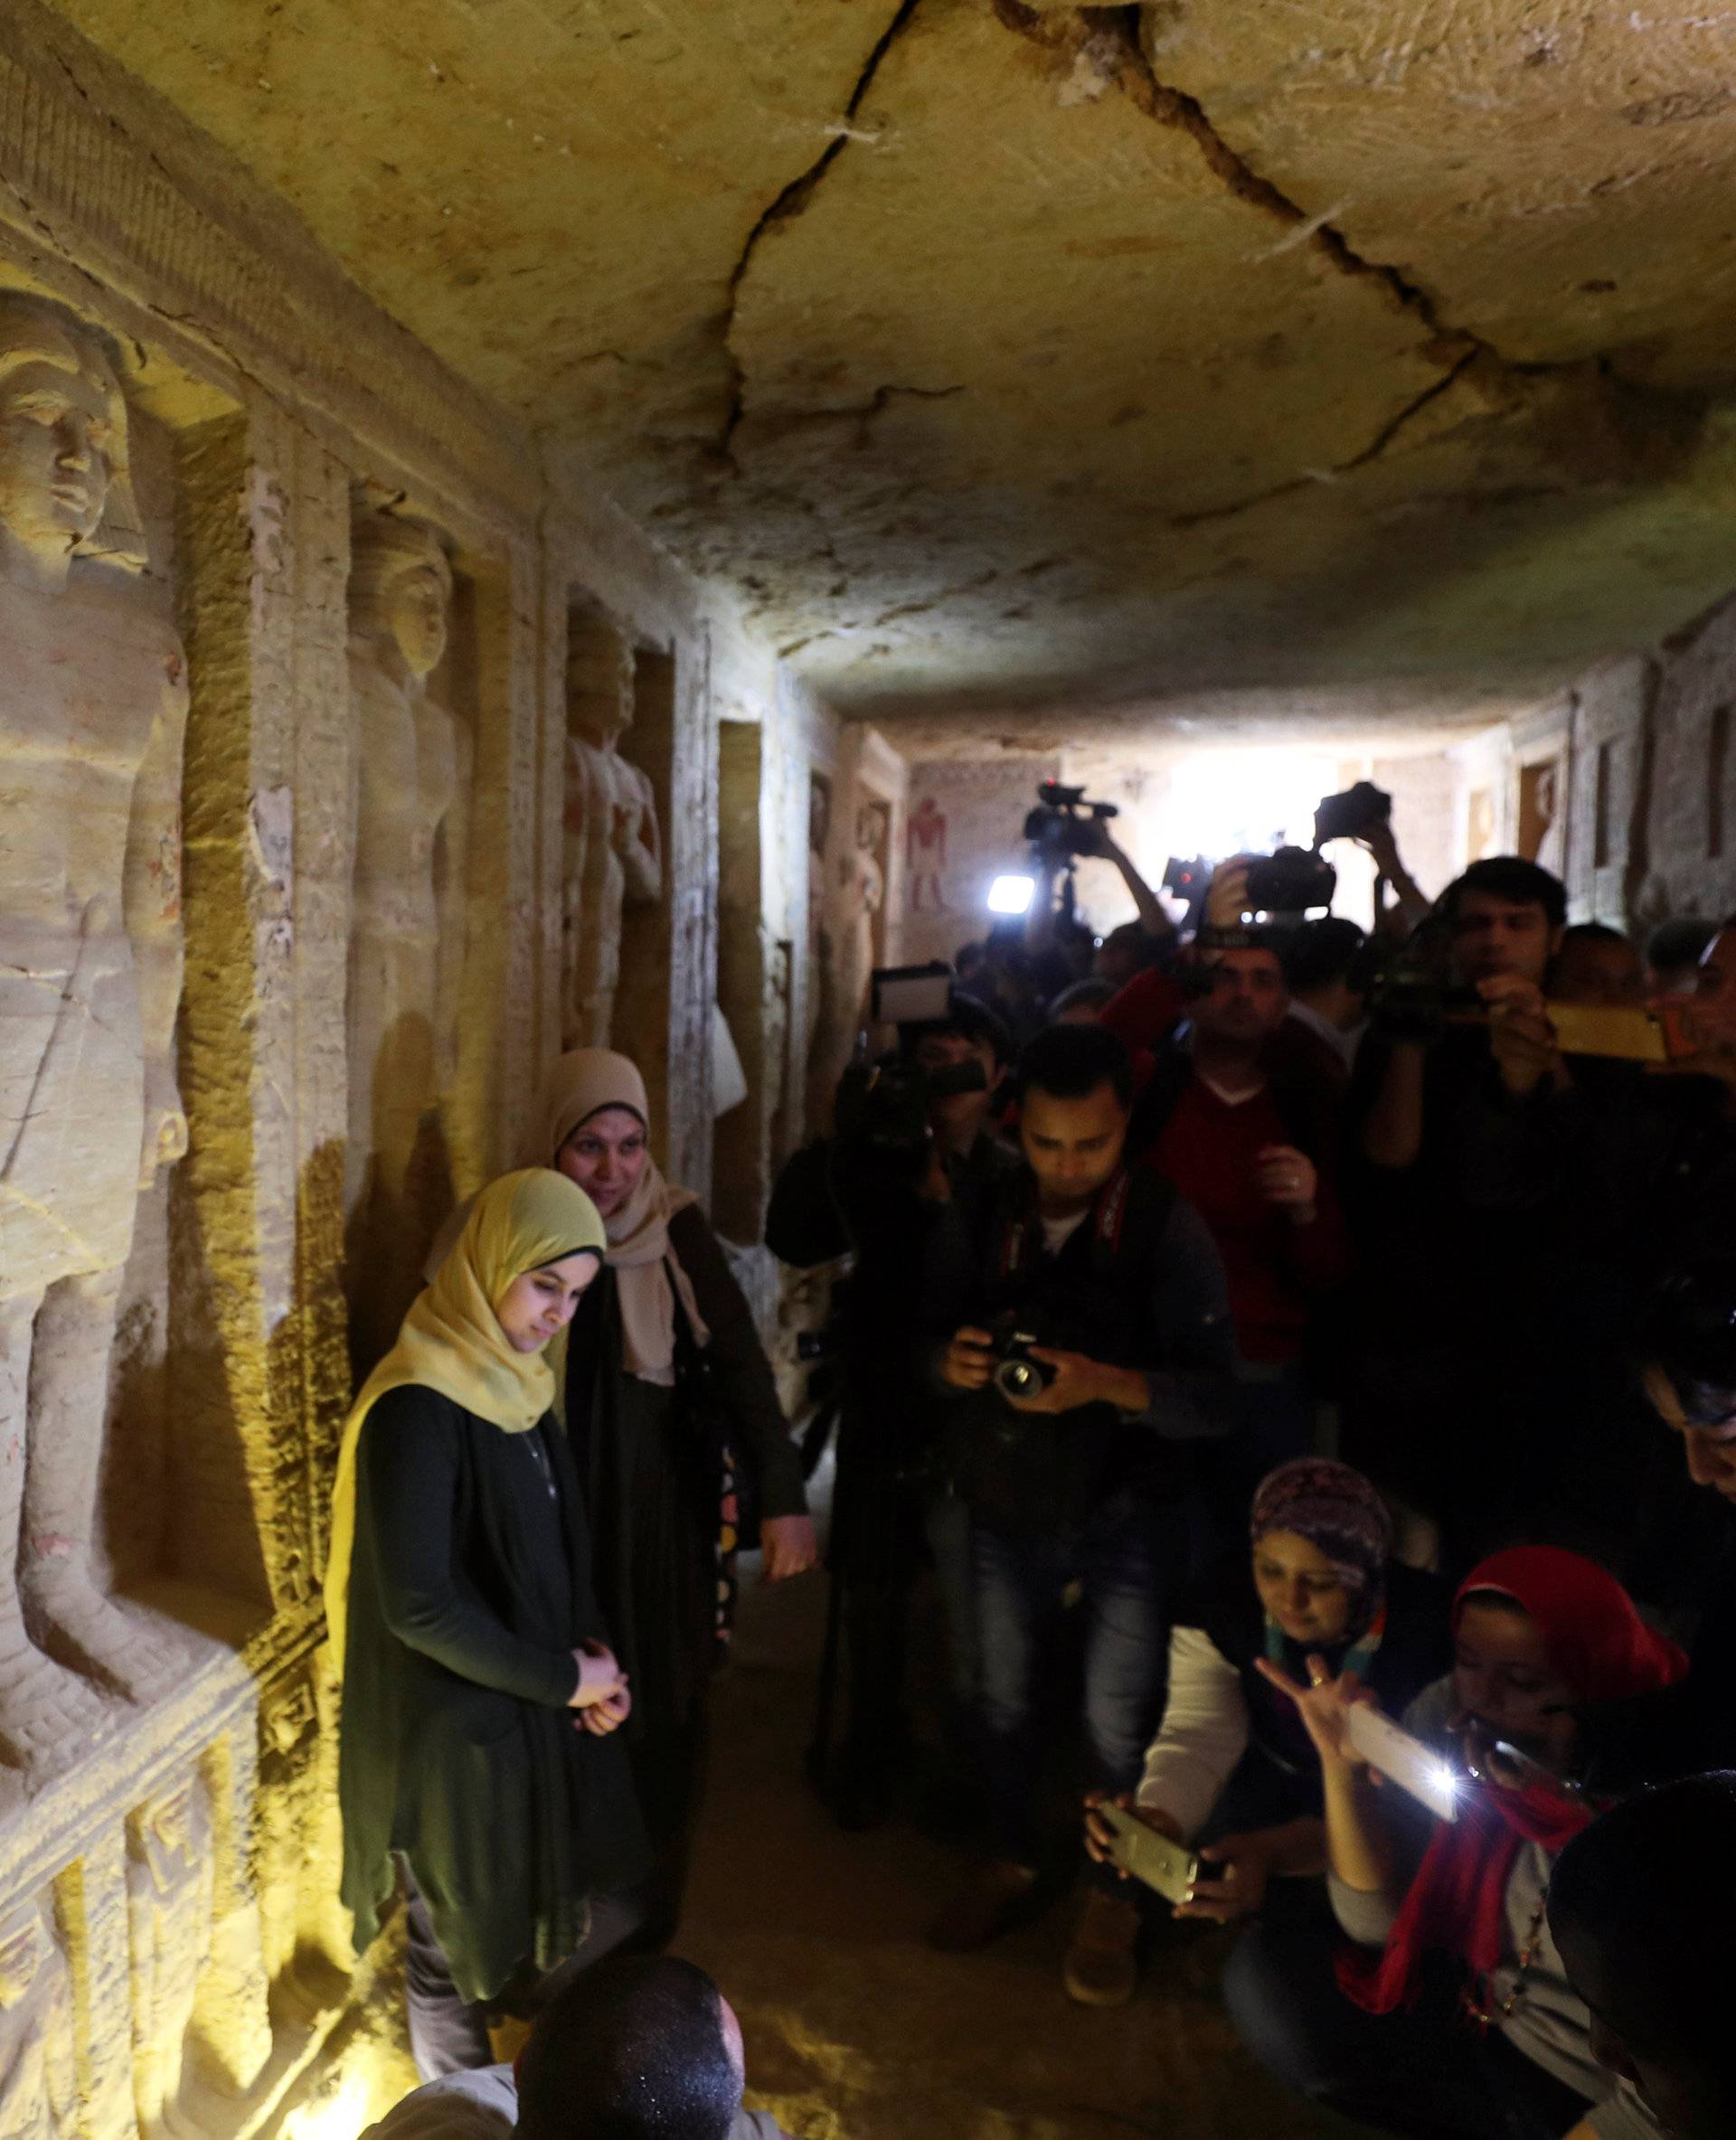 Journalists take photos inside the newly-discovered tomb of 'Wahtye', which dates from the rule of King Neferirkare Kakai, at the Saqqara area near its necropolis, in Giza